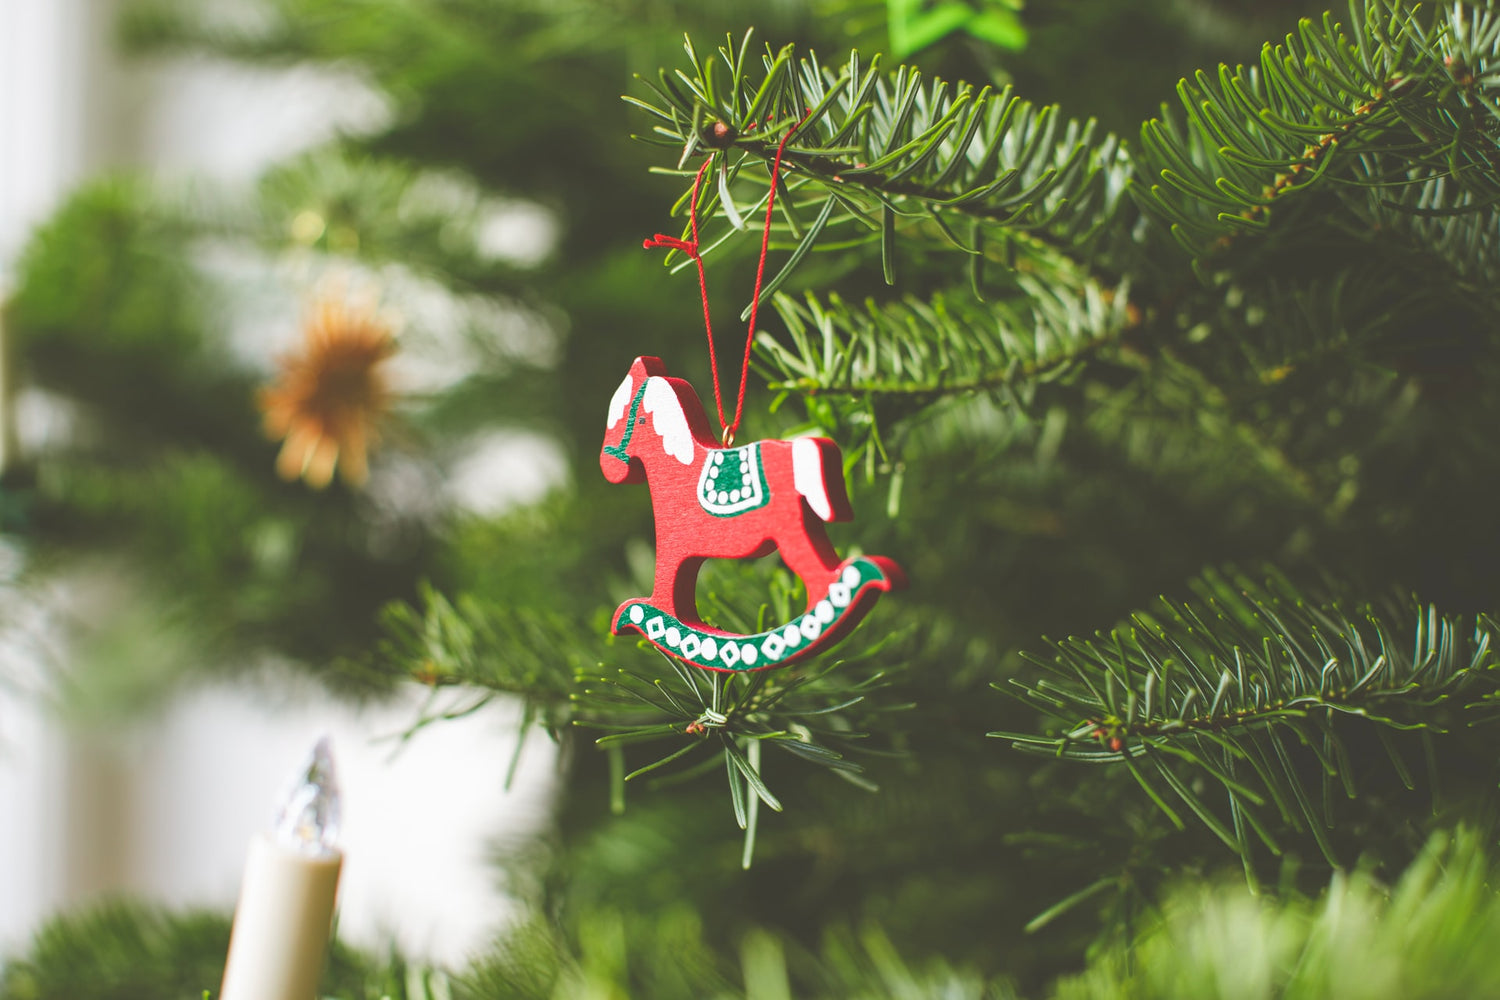 holiday horse gifts for tweens, small red rocking horse tree ornament hangs from pine tree